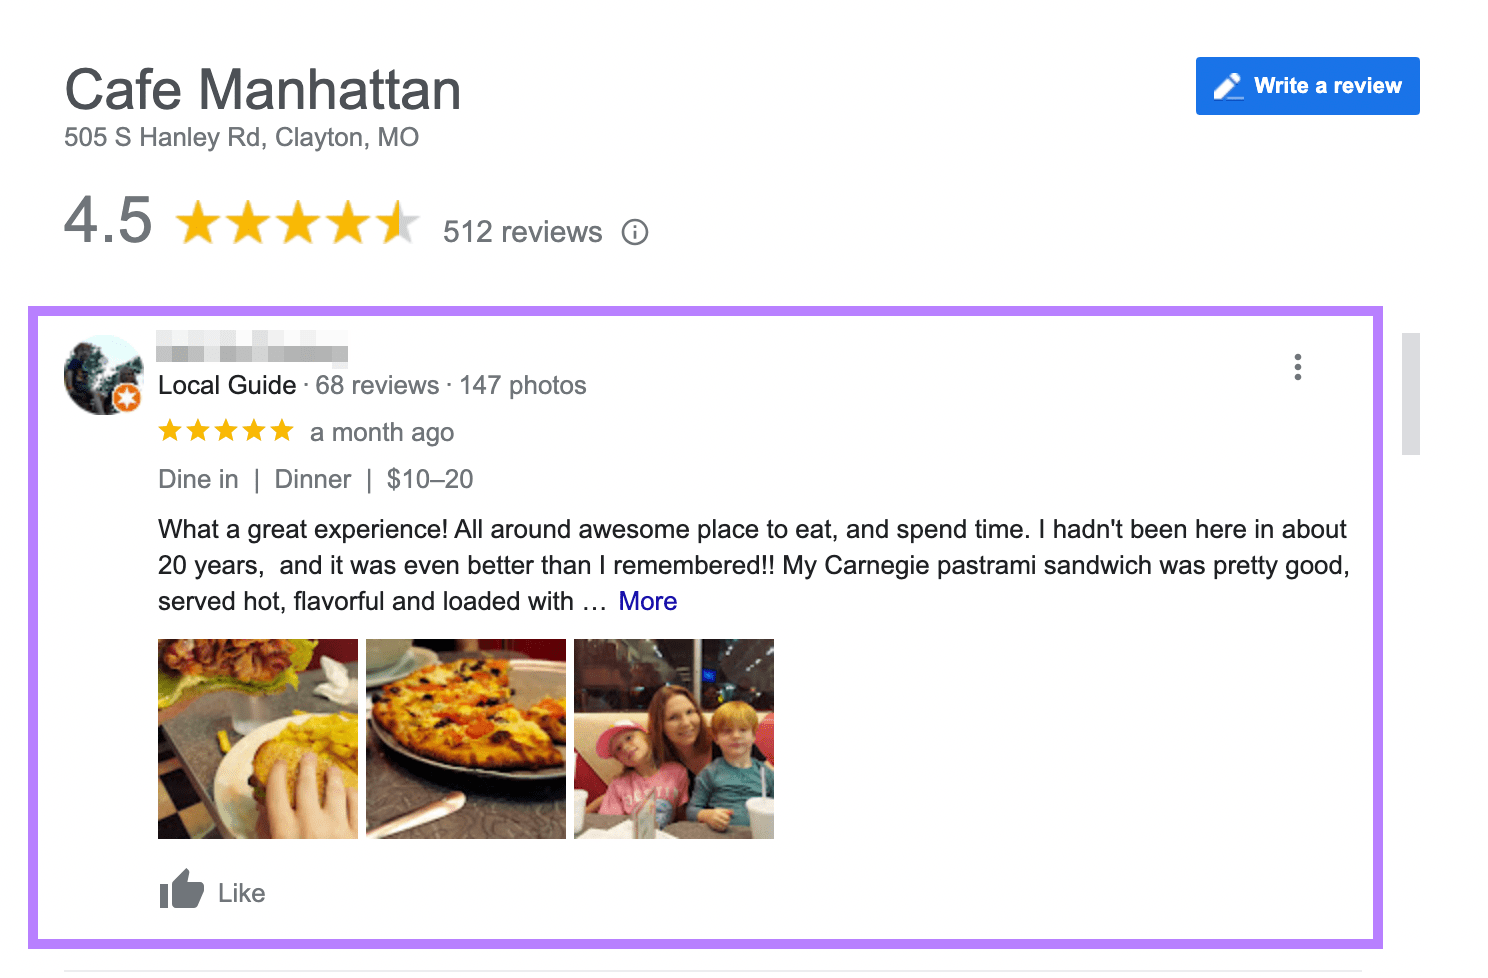 Cafe Manhattan's reviews in Google search results